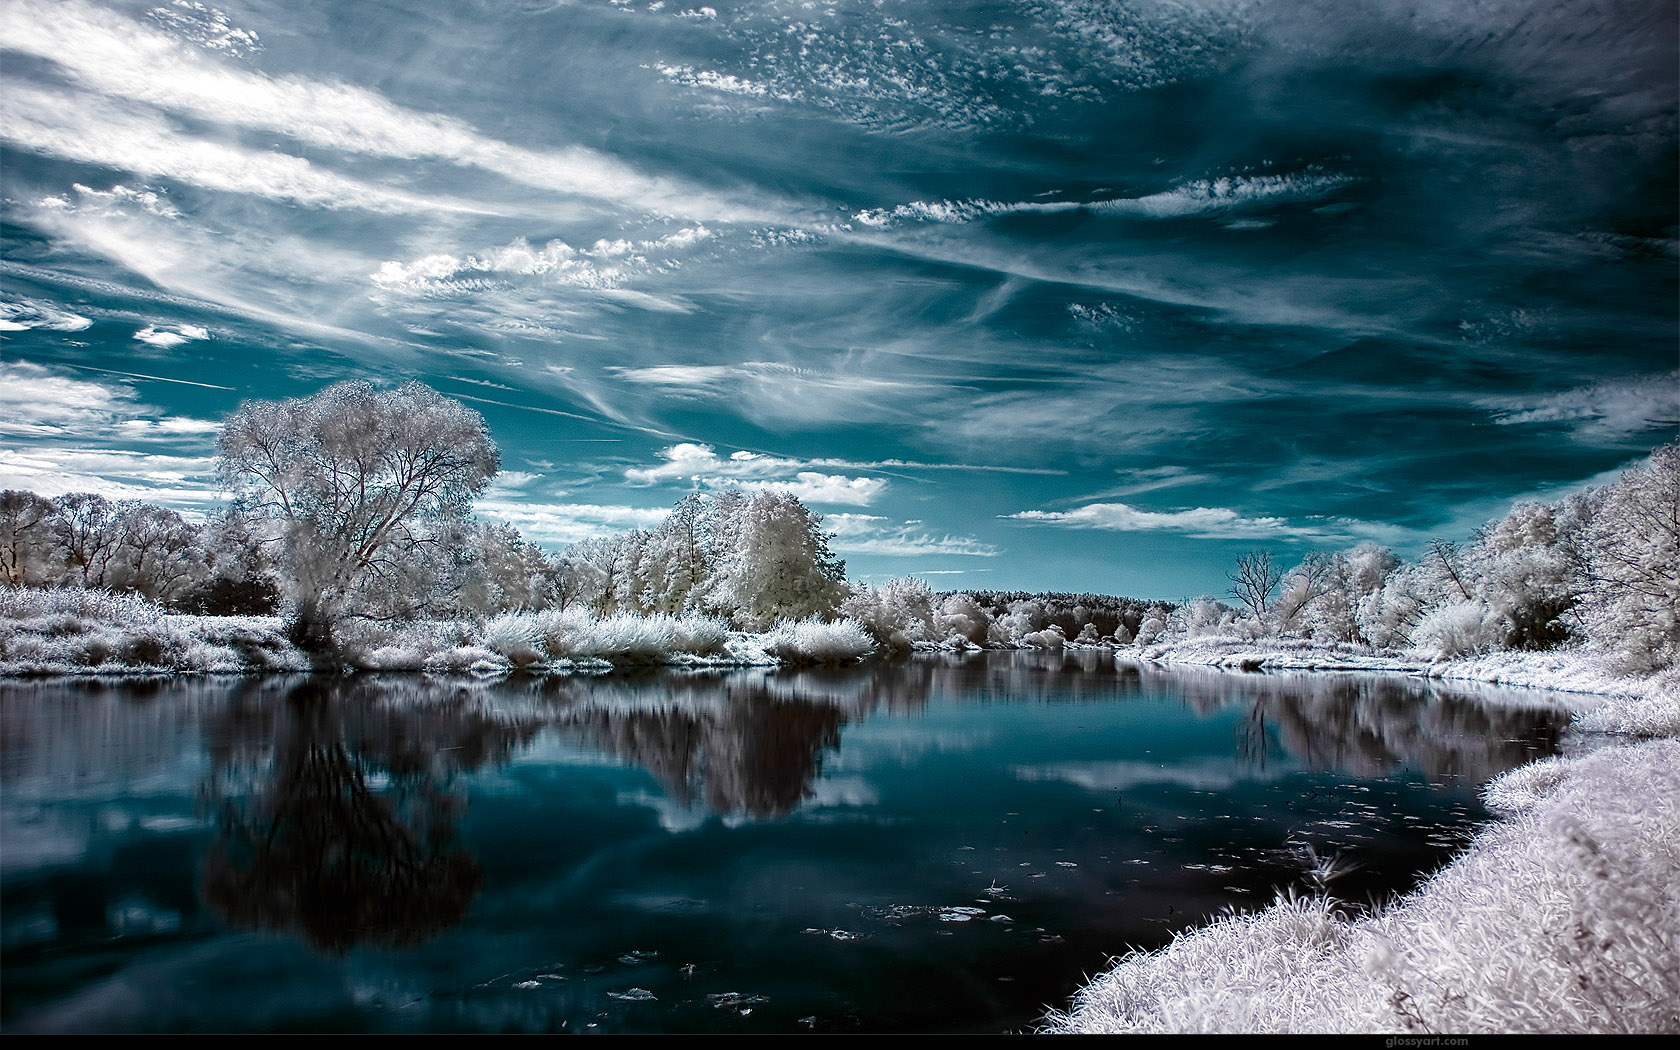 General 1680x1050 landscape negative forest lake winter infrared nature sky reflection water snow ice